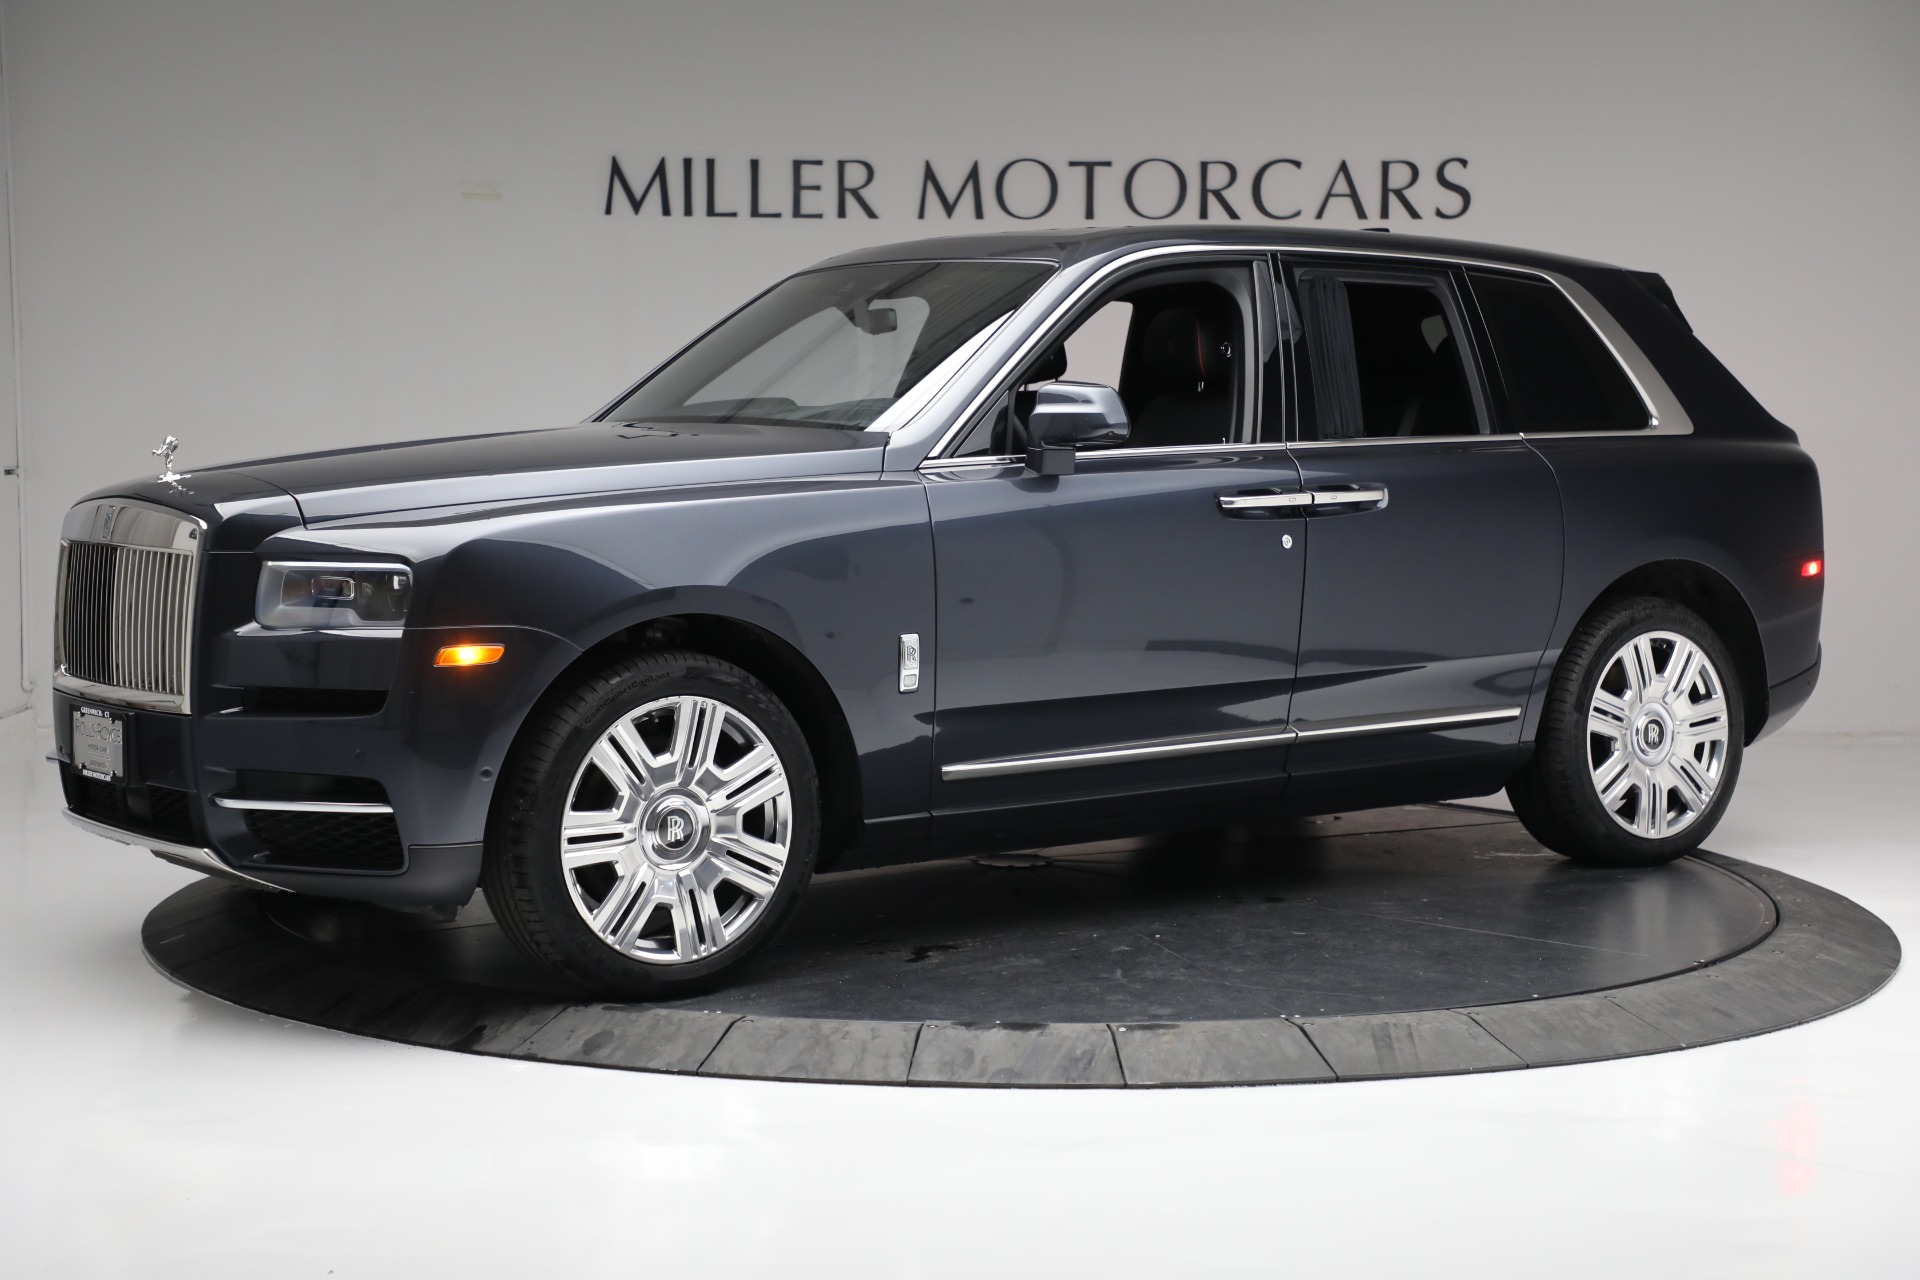 Used 2019 Rolls-Royce Cullinan for sale Sold at Alfa Romeo of Greenwich in Greenwich CT 06830 1